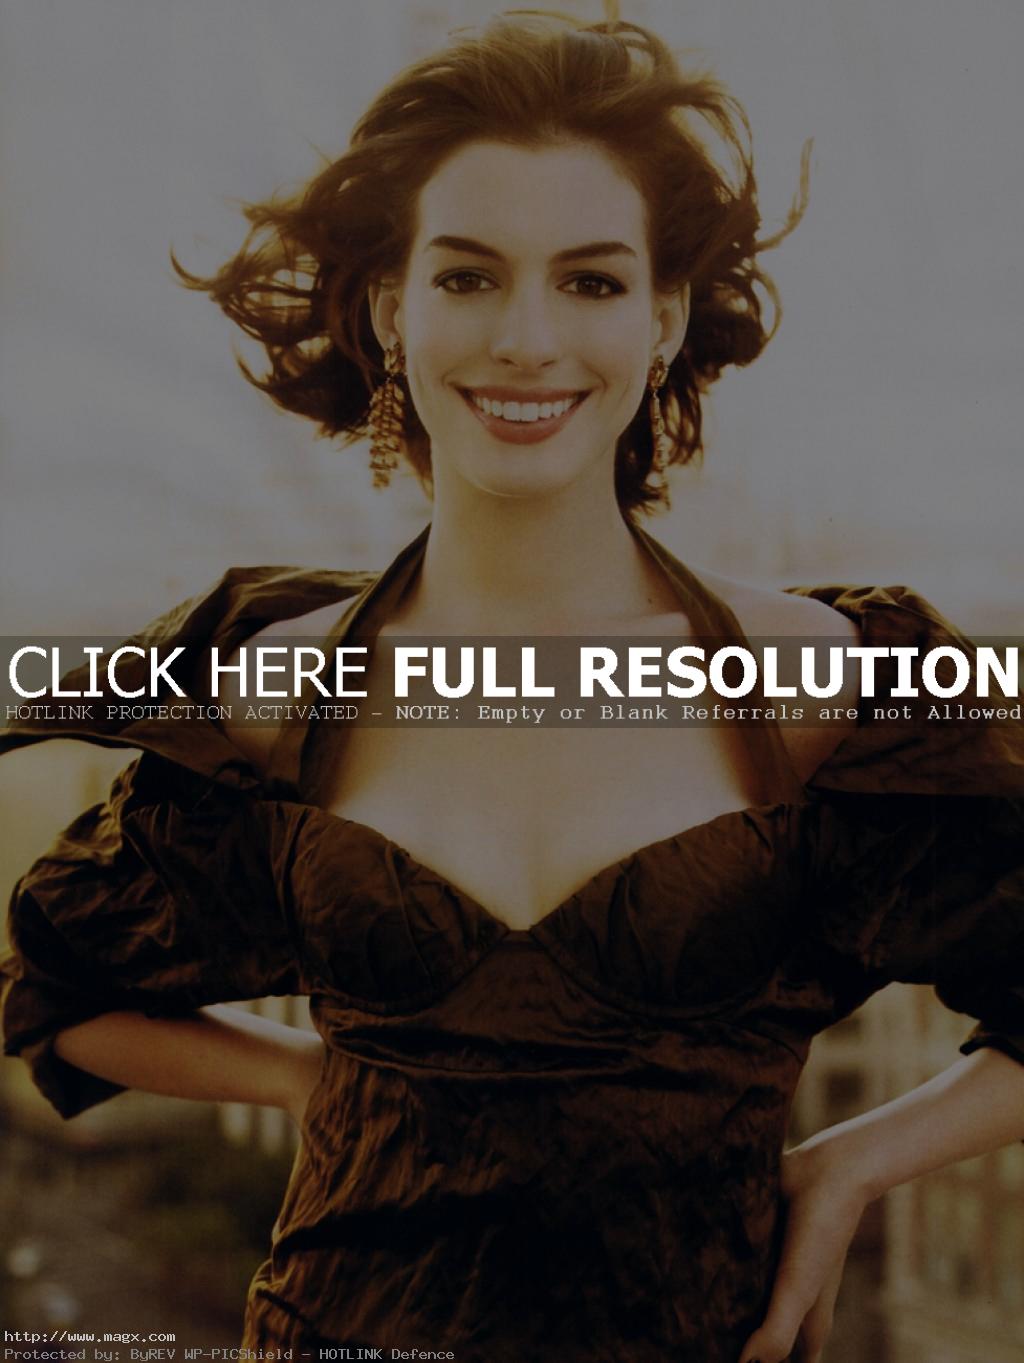 anne hathaway10 Anne Hathaway Biography and Hot Photos